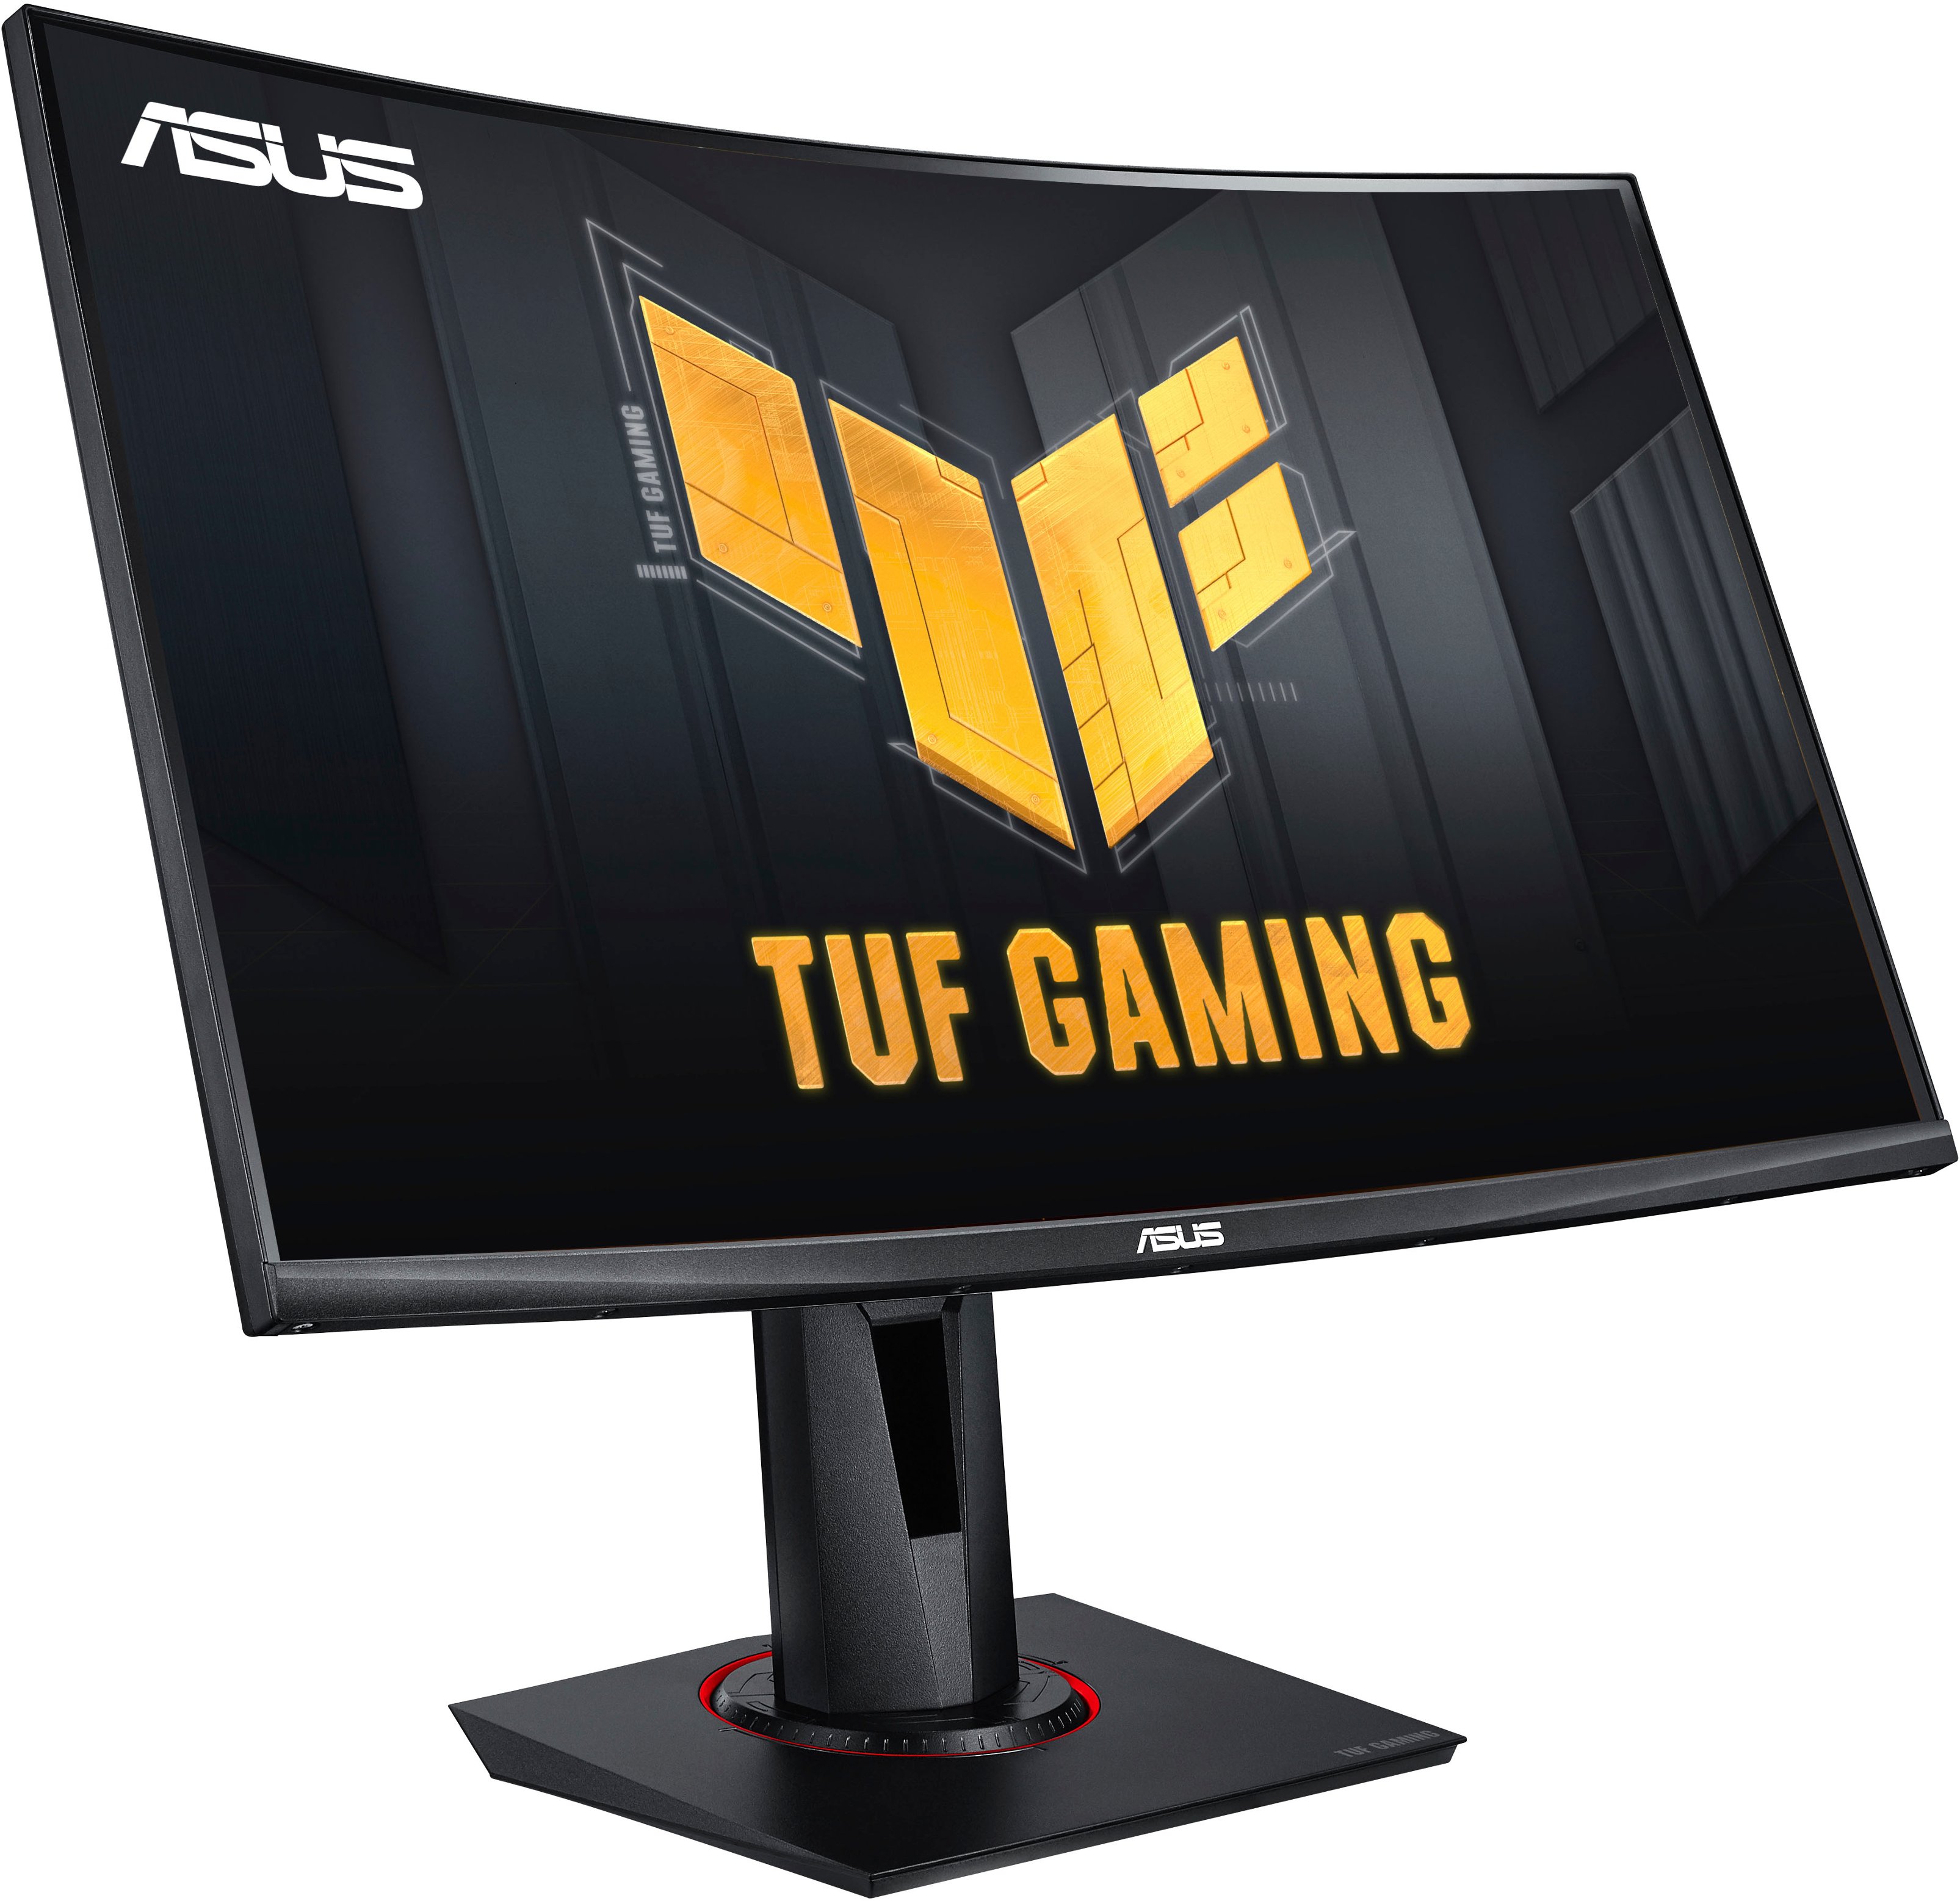 Angle View: ASUS - TUF Gaming 27" Curved FHD 240Hz 1ms FreeSync Premium Gaming Monitor w/ HDR and Height Adjust (DisplayPort, HDMI) - Black